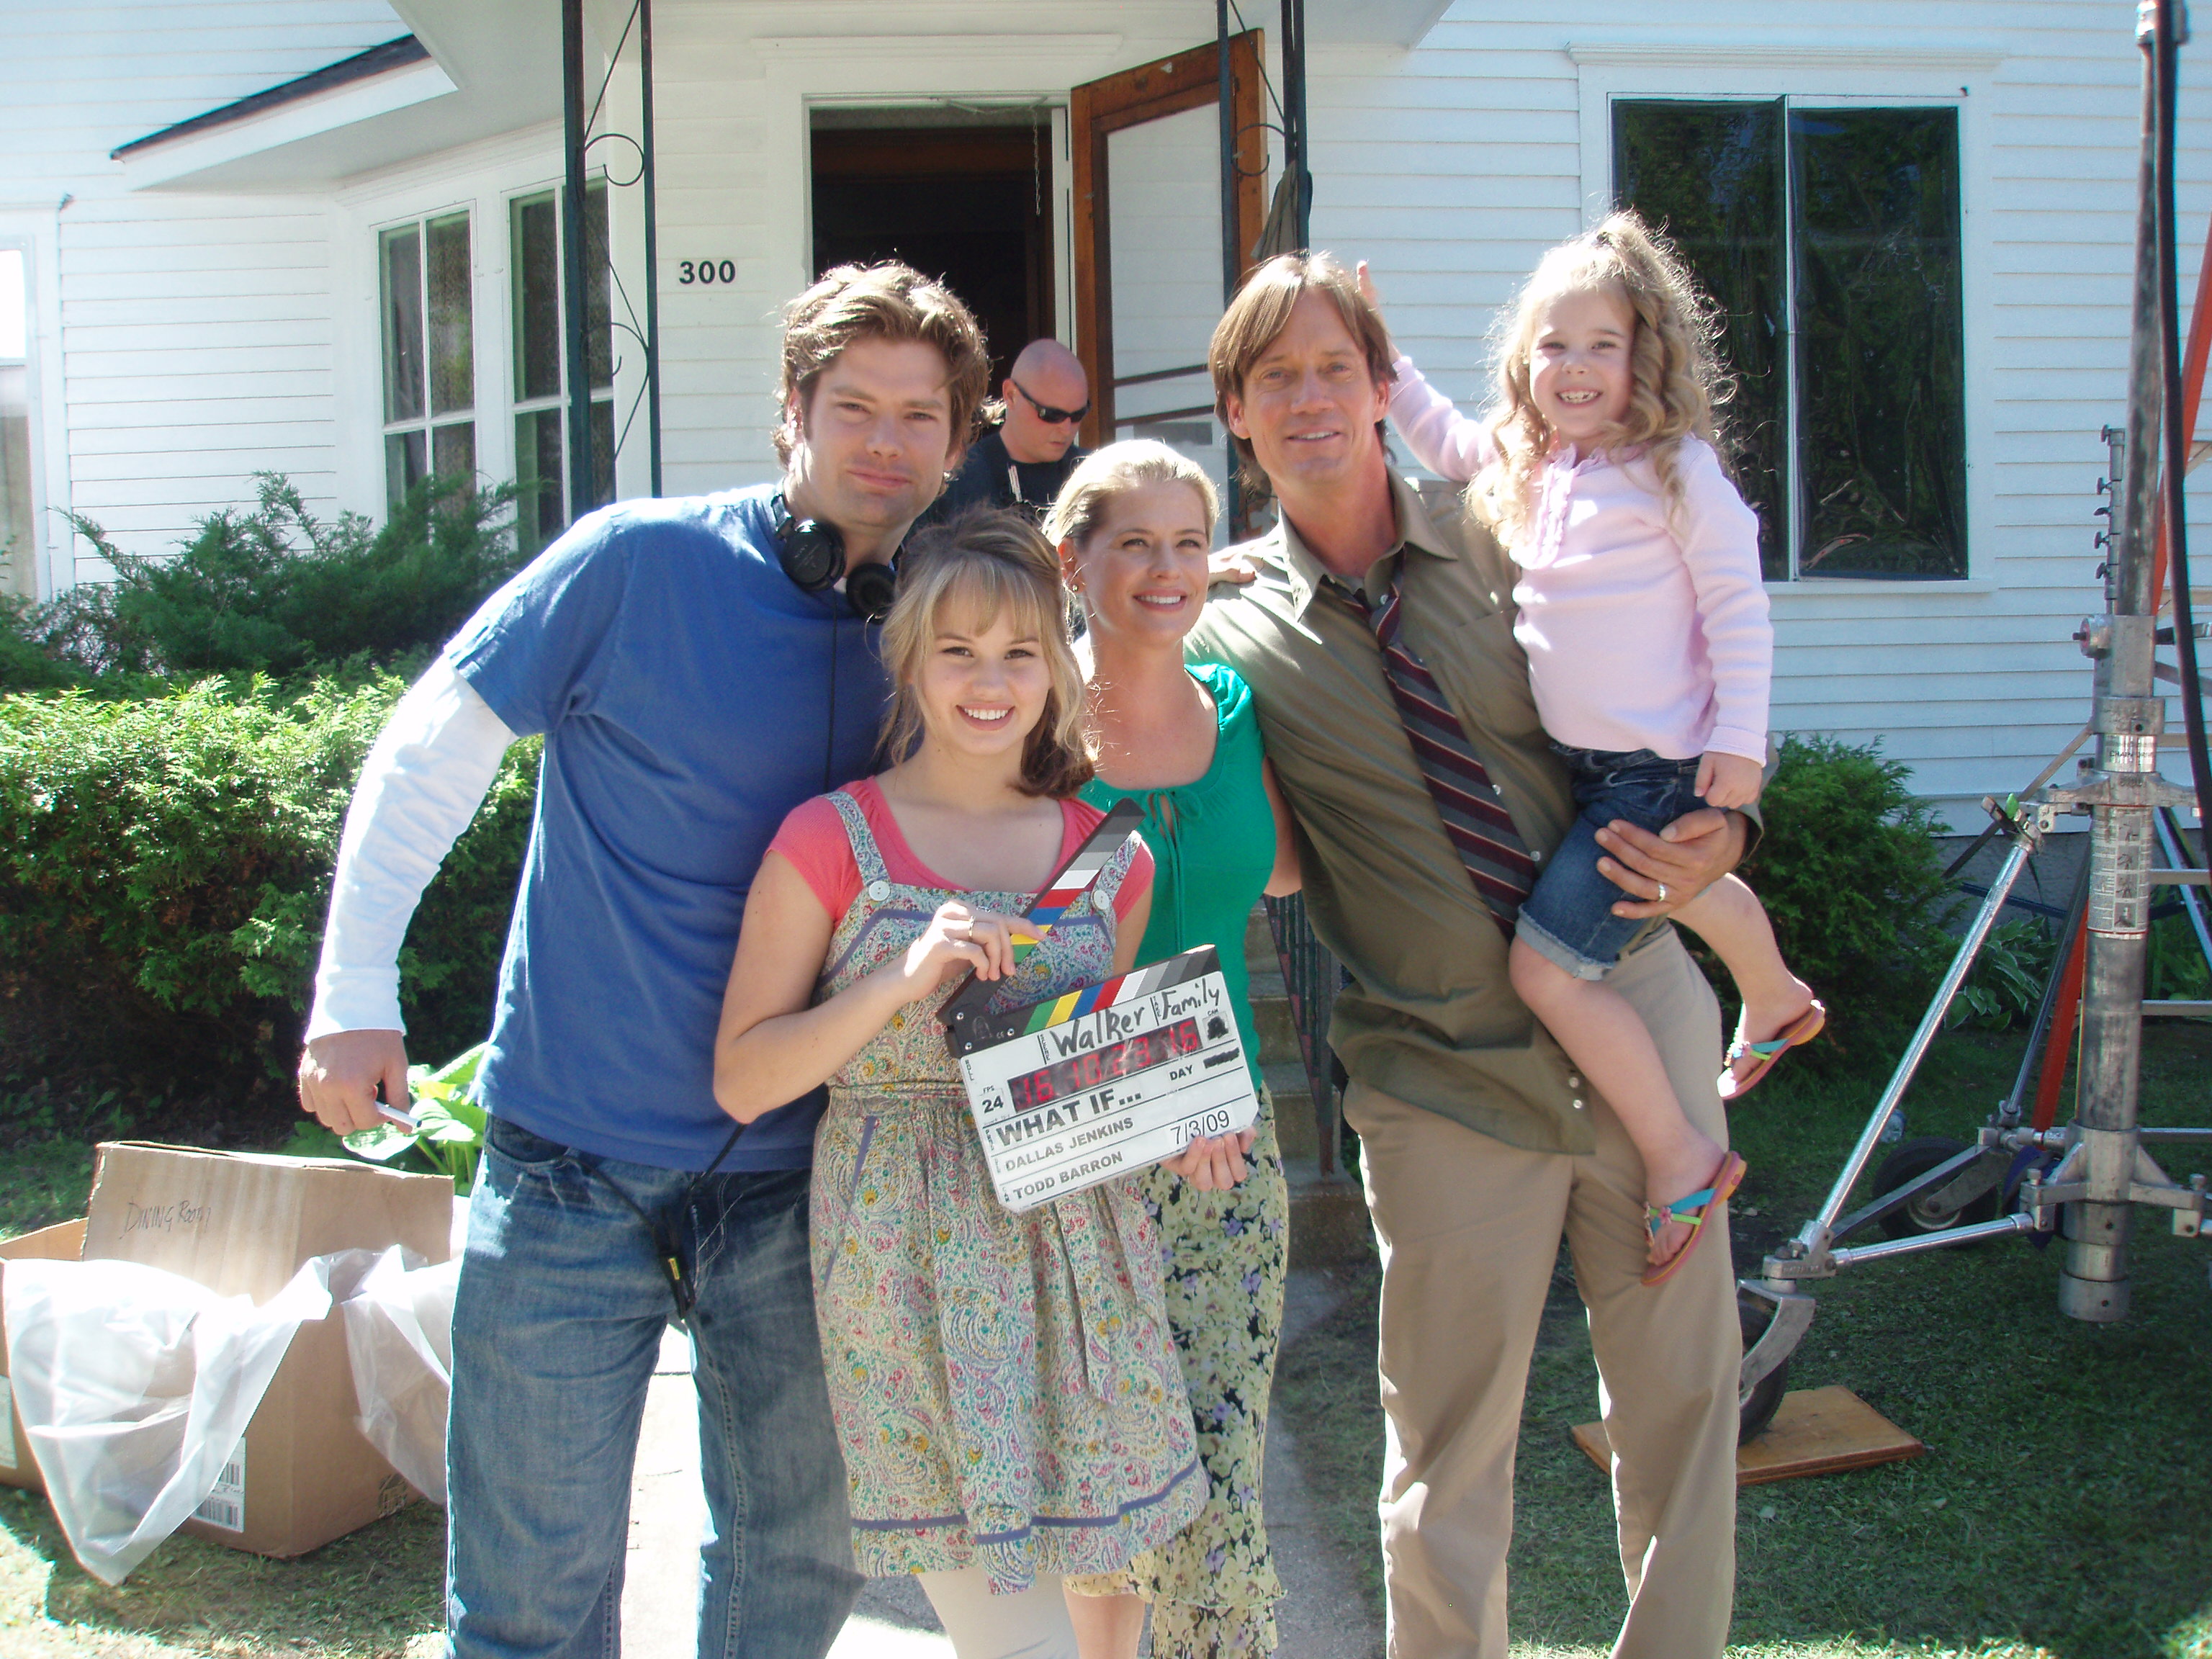 Taylor with Director, Dallas Jenkins, and costars, Debby Ryan, Kristy Swanson, and Kevin Sorbo on the set of 